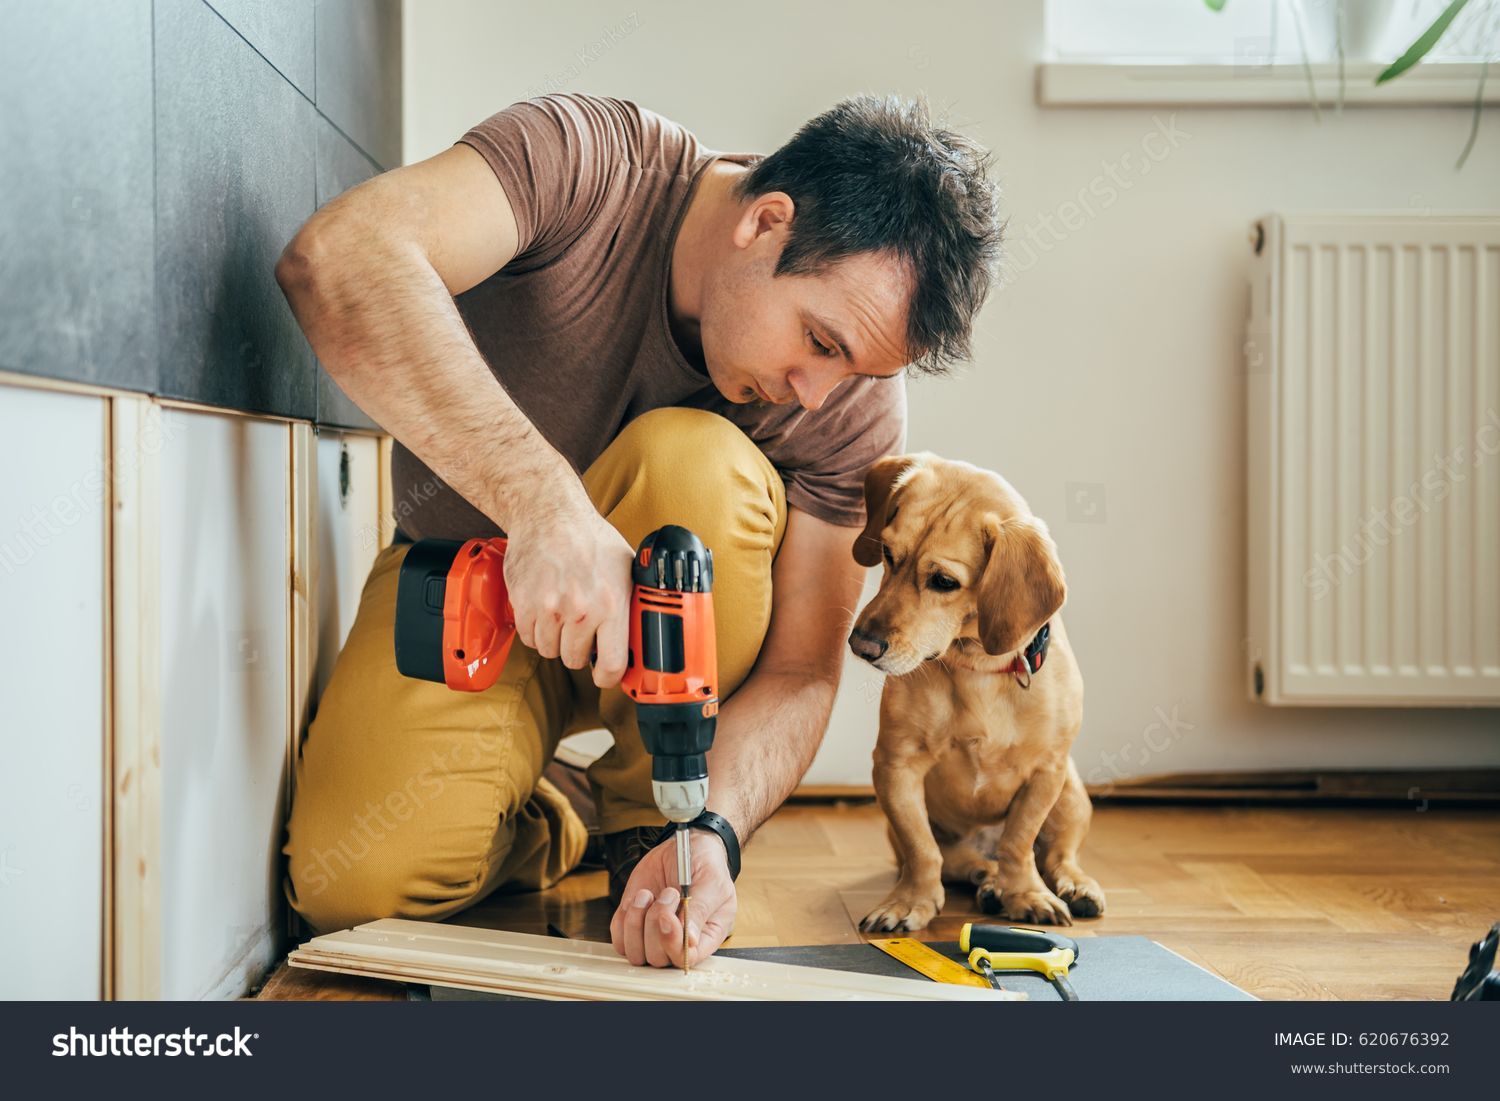 Man doing renovation work at home together with his small yellow dog #620676392